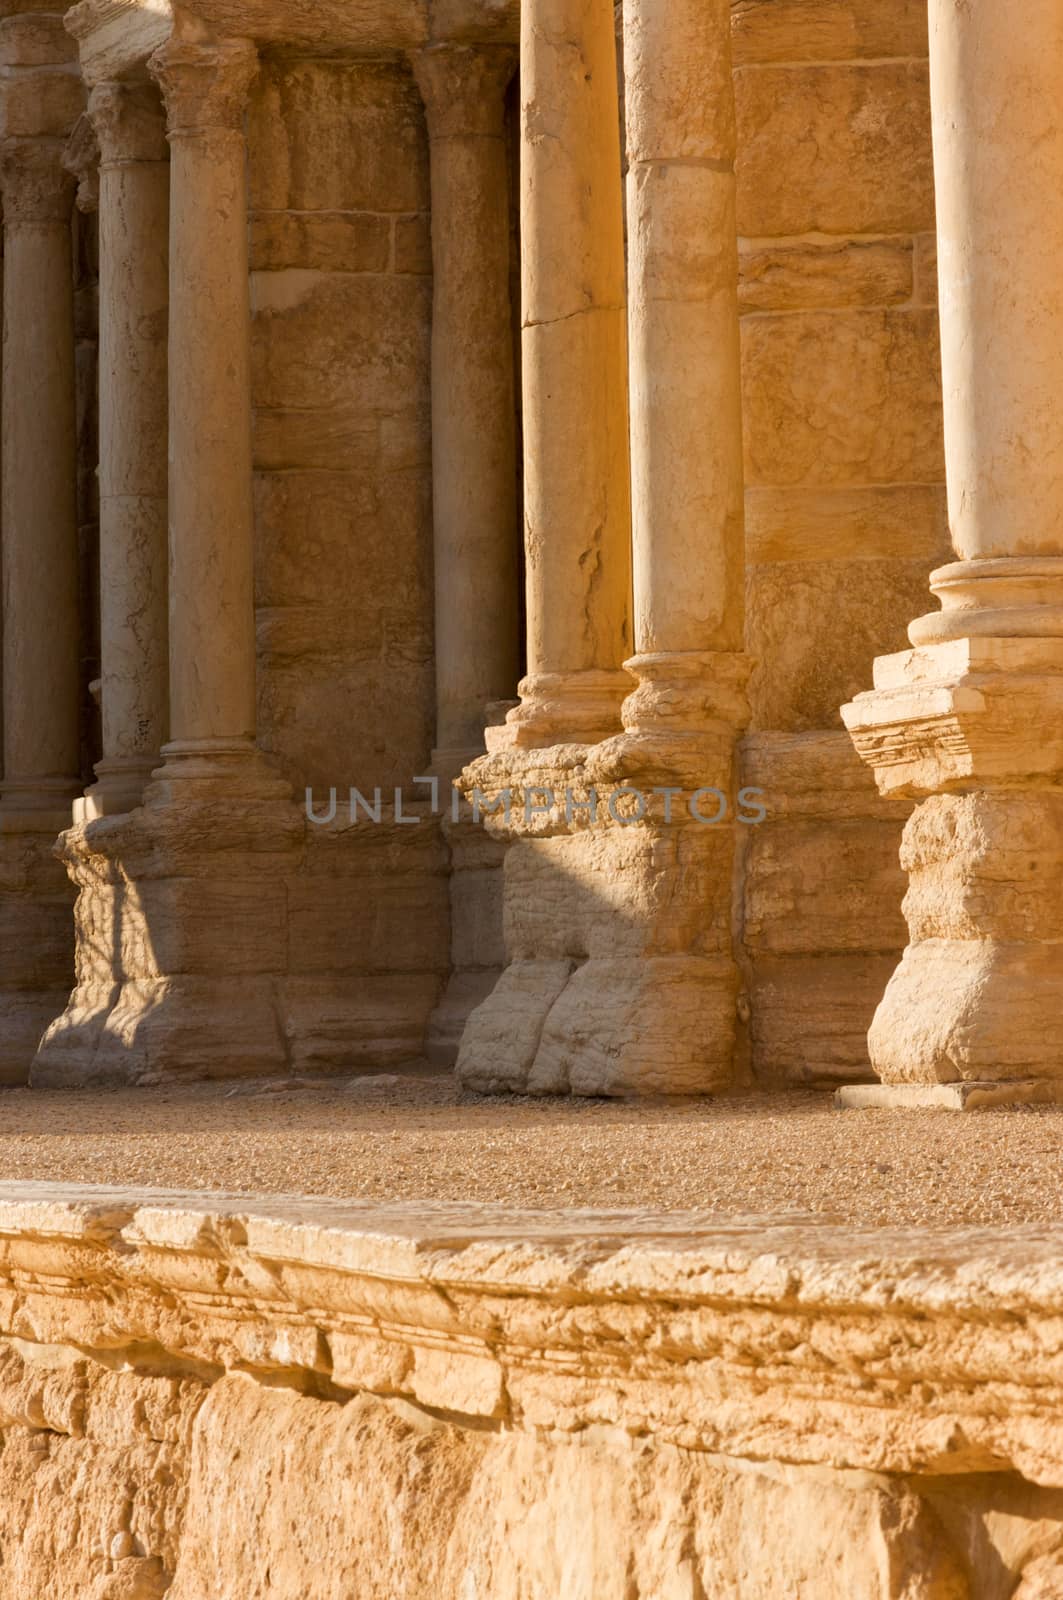 Palmyre Syria 2009 This ancient site has many Roman ruins, these standing columns shot in late afternoon sun with the citadel on the hill in the background . High quality photo